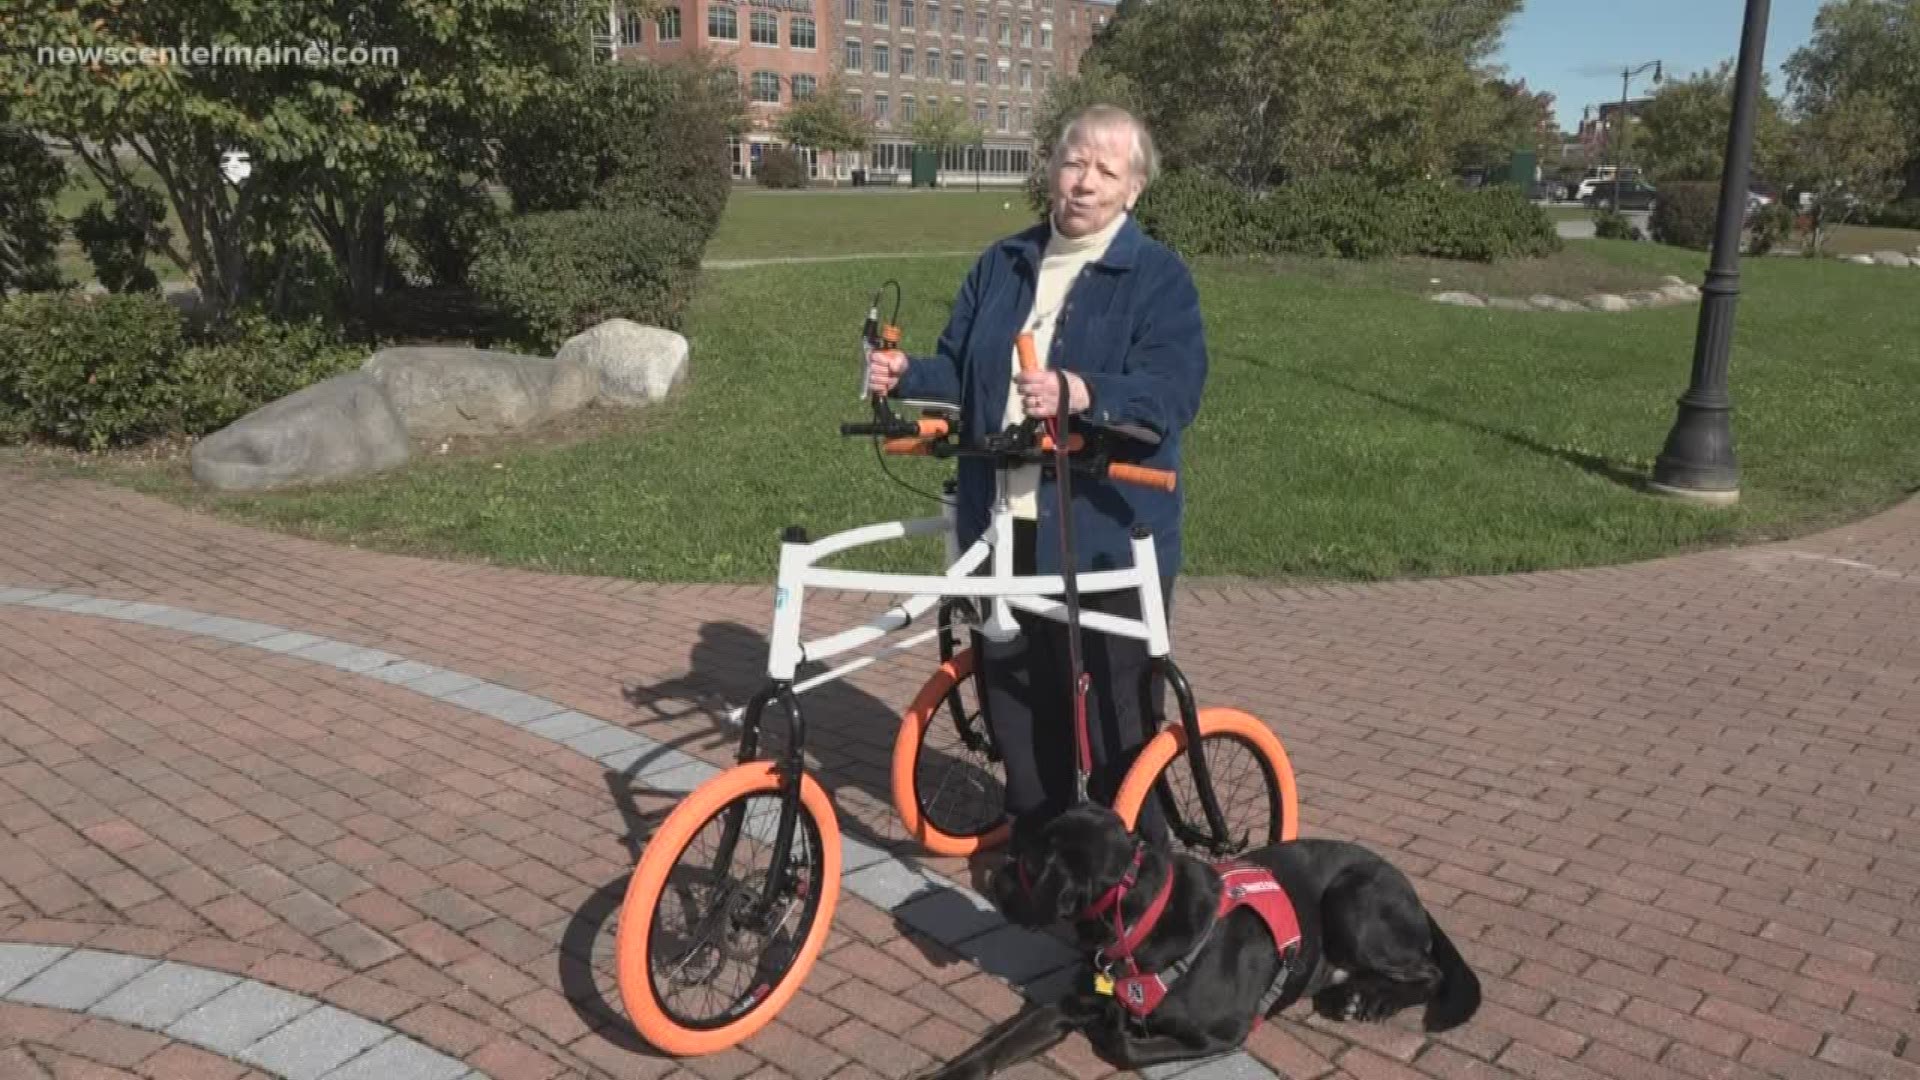 A first of its kind bicycle... And it's being made right here in Maine. This bike gives people with disabilities the opportunity to get out and exercise.